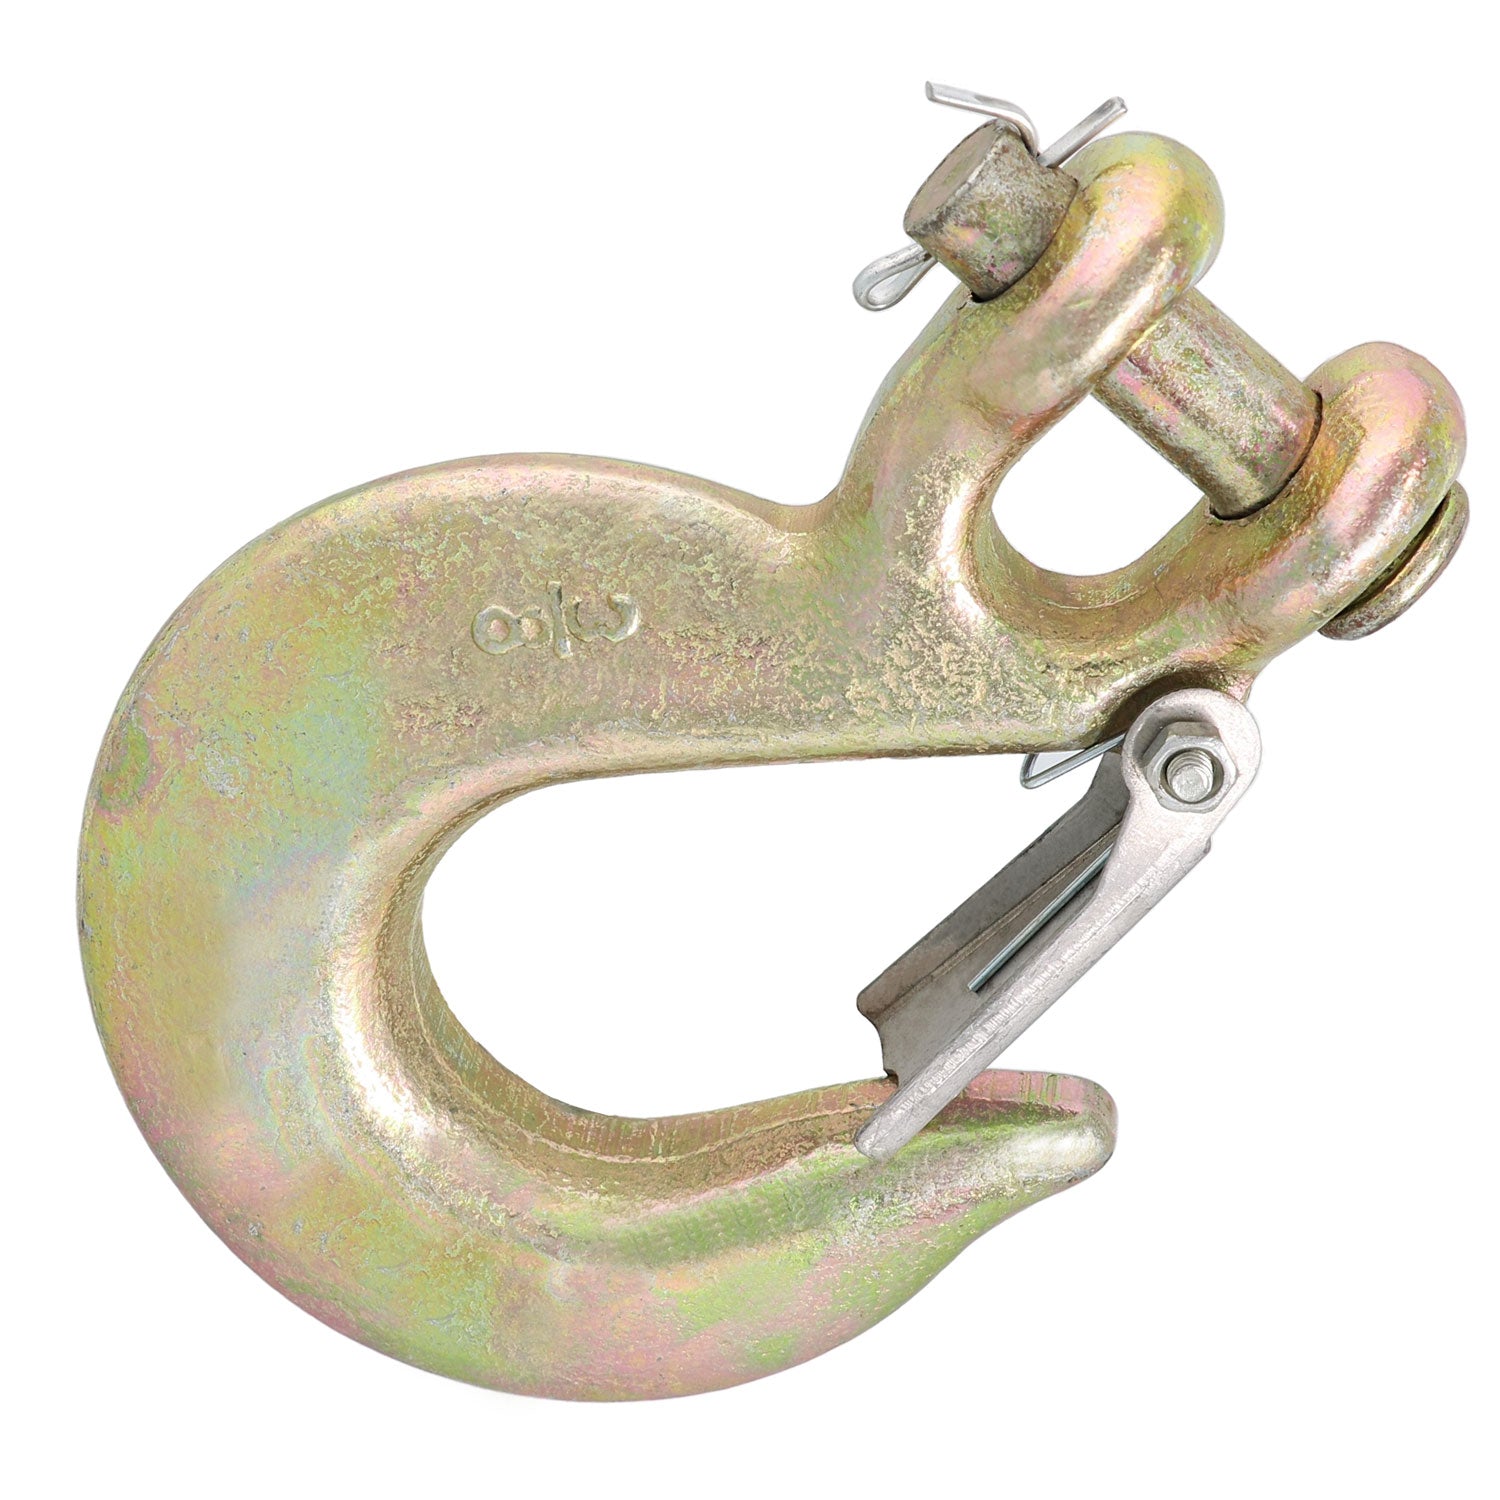 3/8 Grade 70 Clevis Slip Hook, for Transport Use, Yellow Chromate